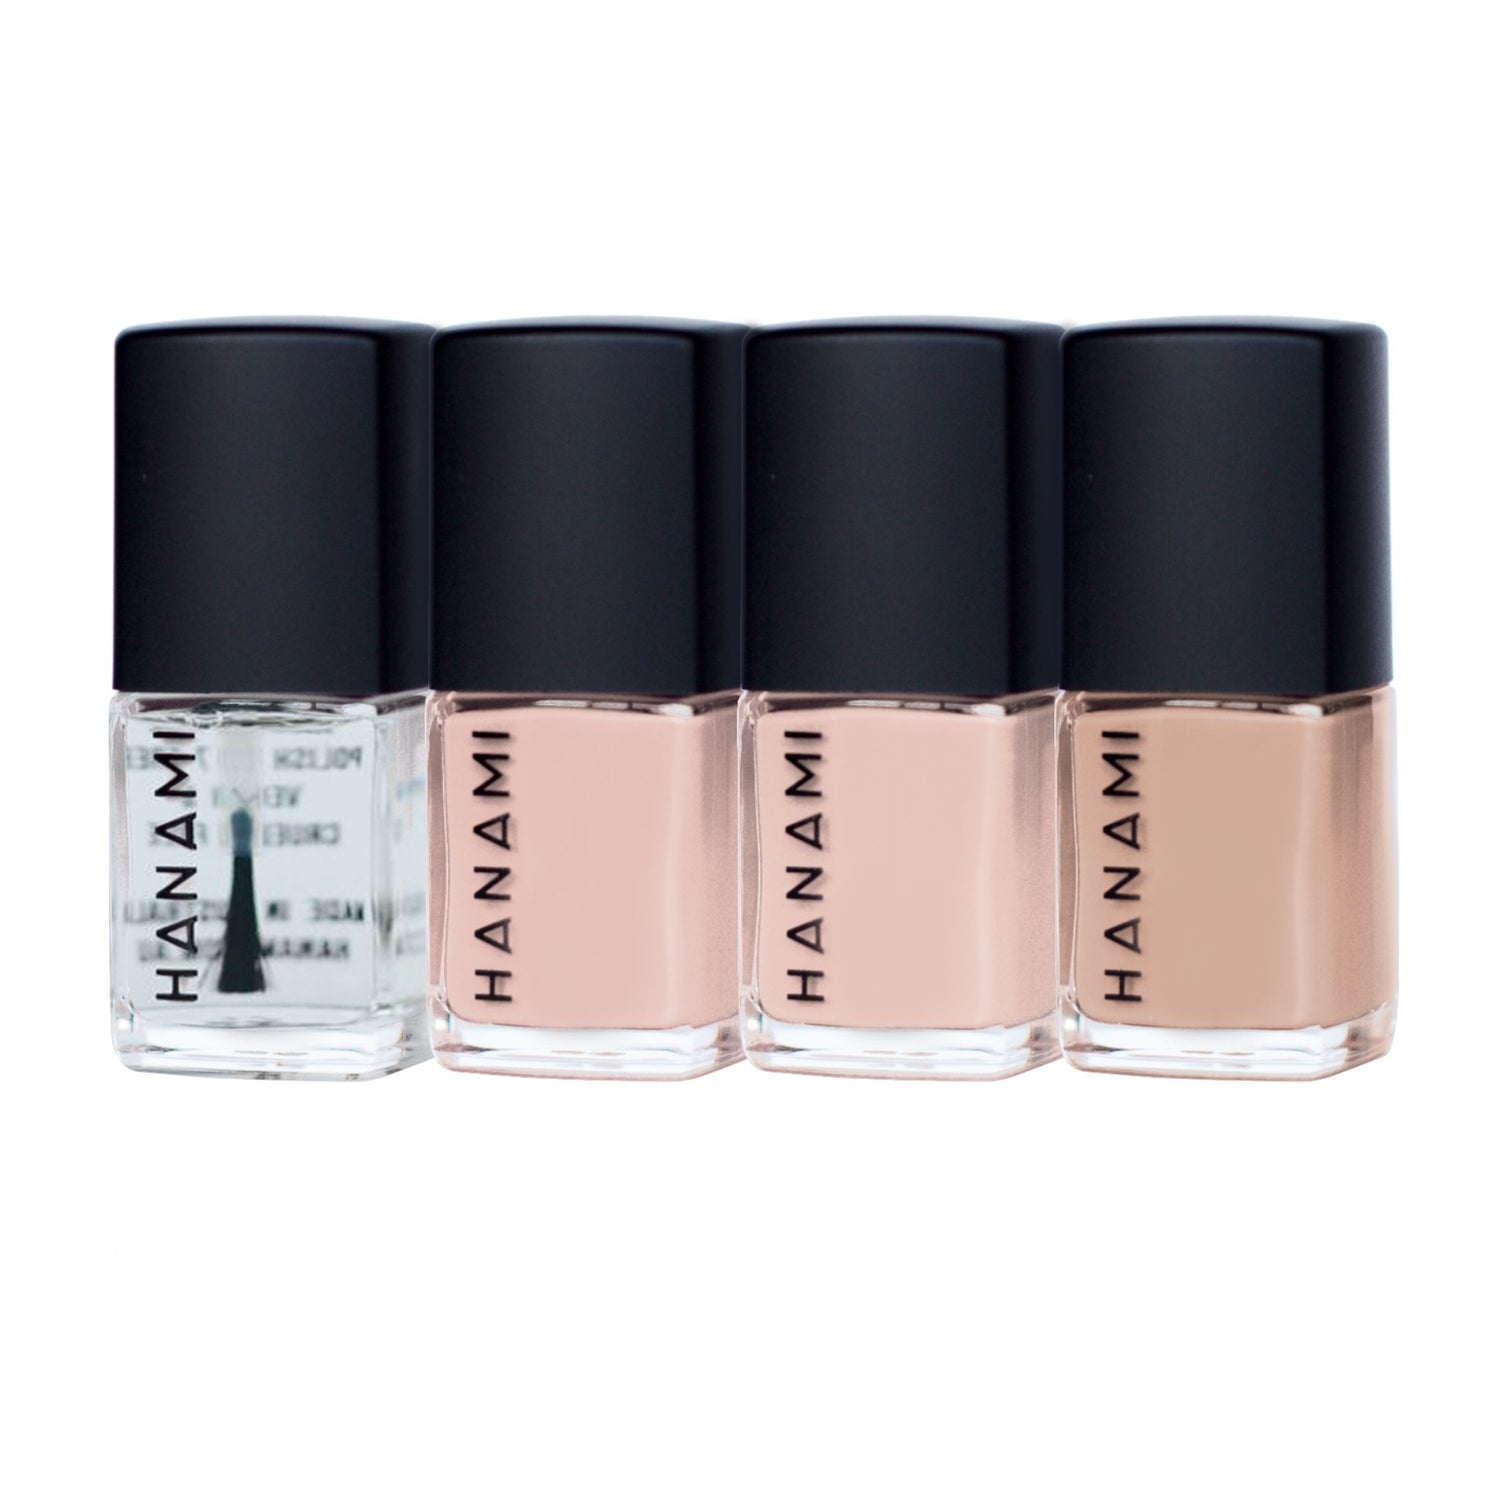 Hanami nail polishes in nudes for French manicure